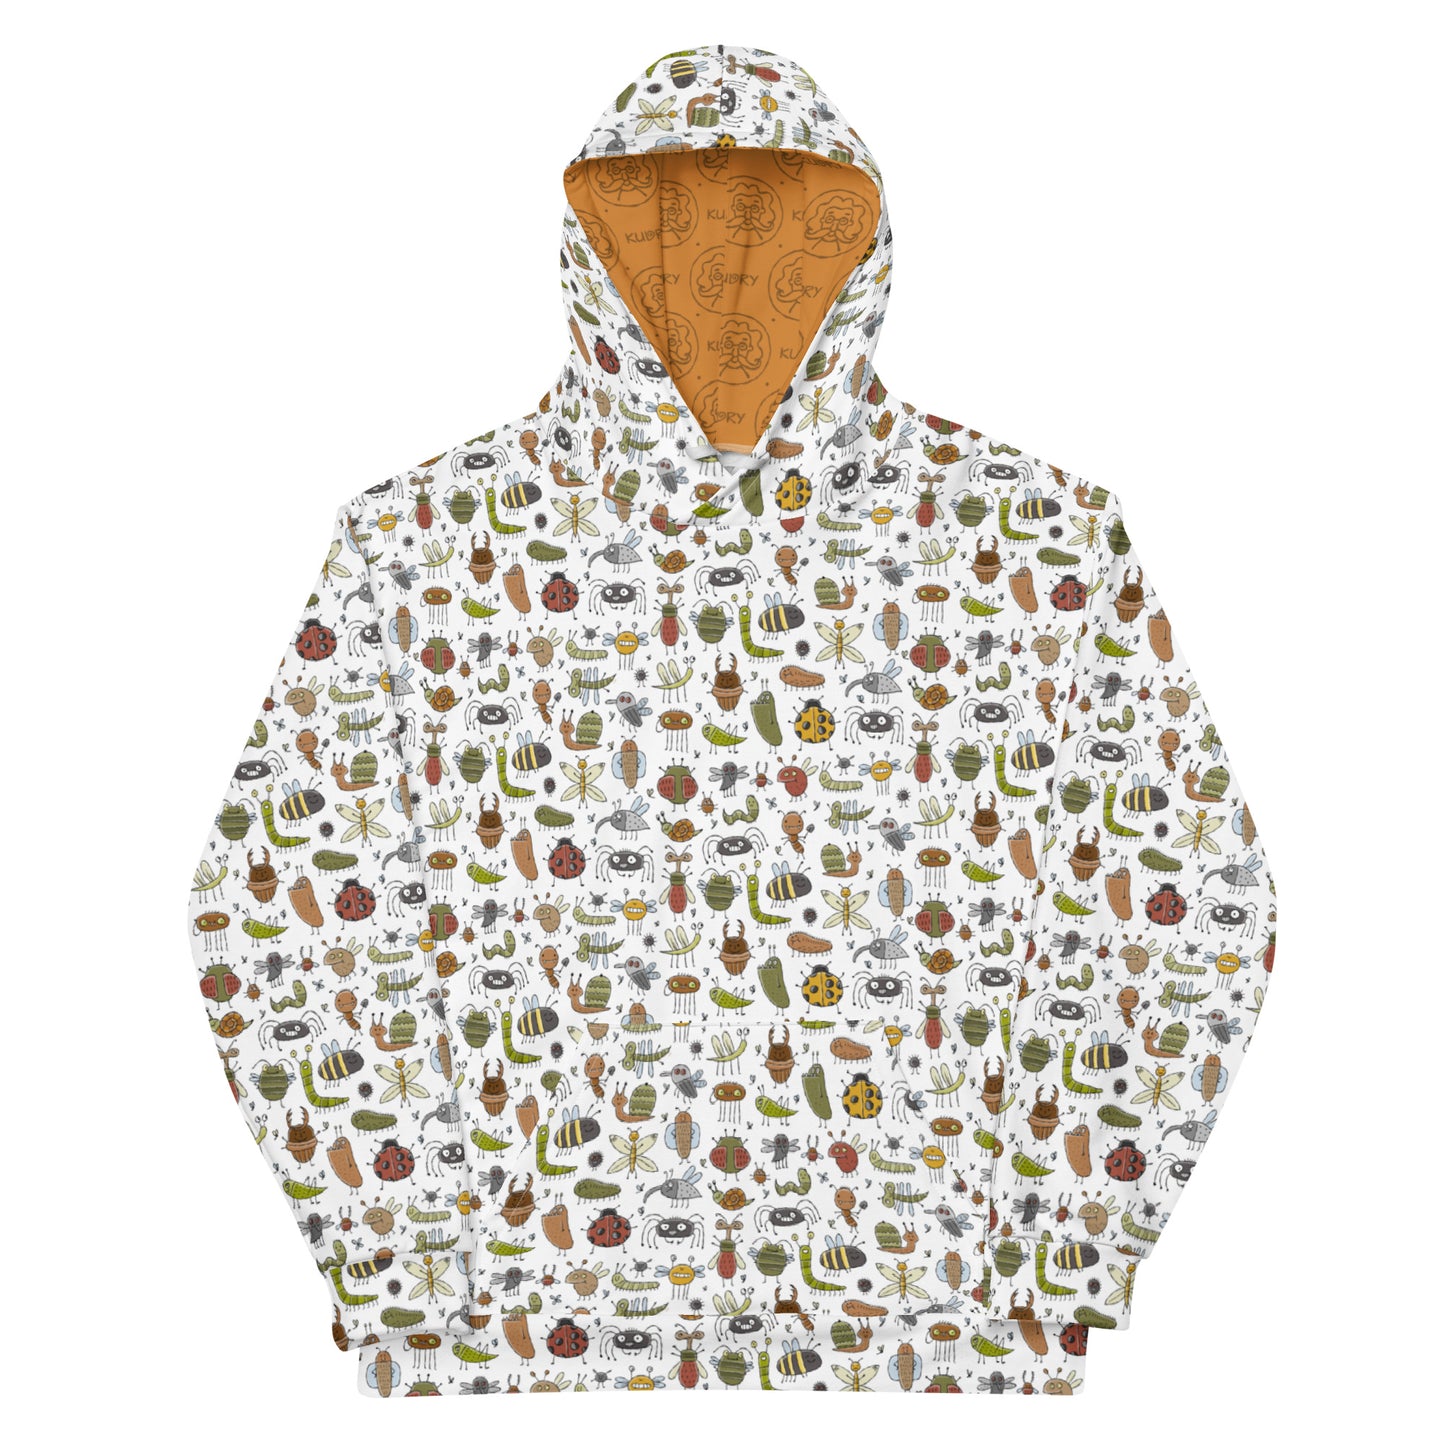 Entomology Unisex Hoodie with funny designer print - insect collection